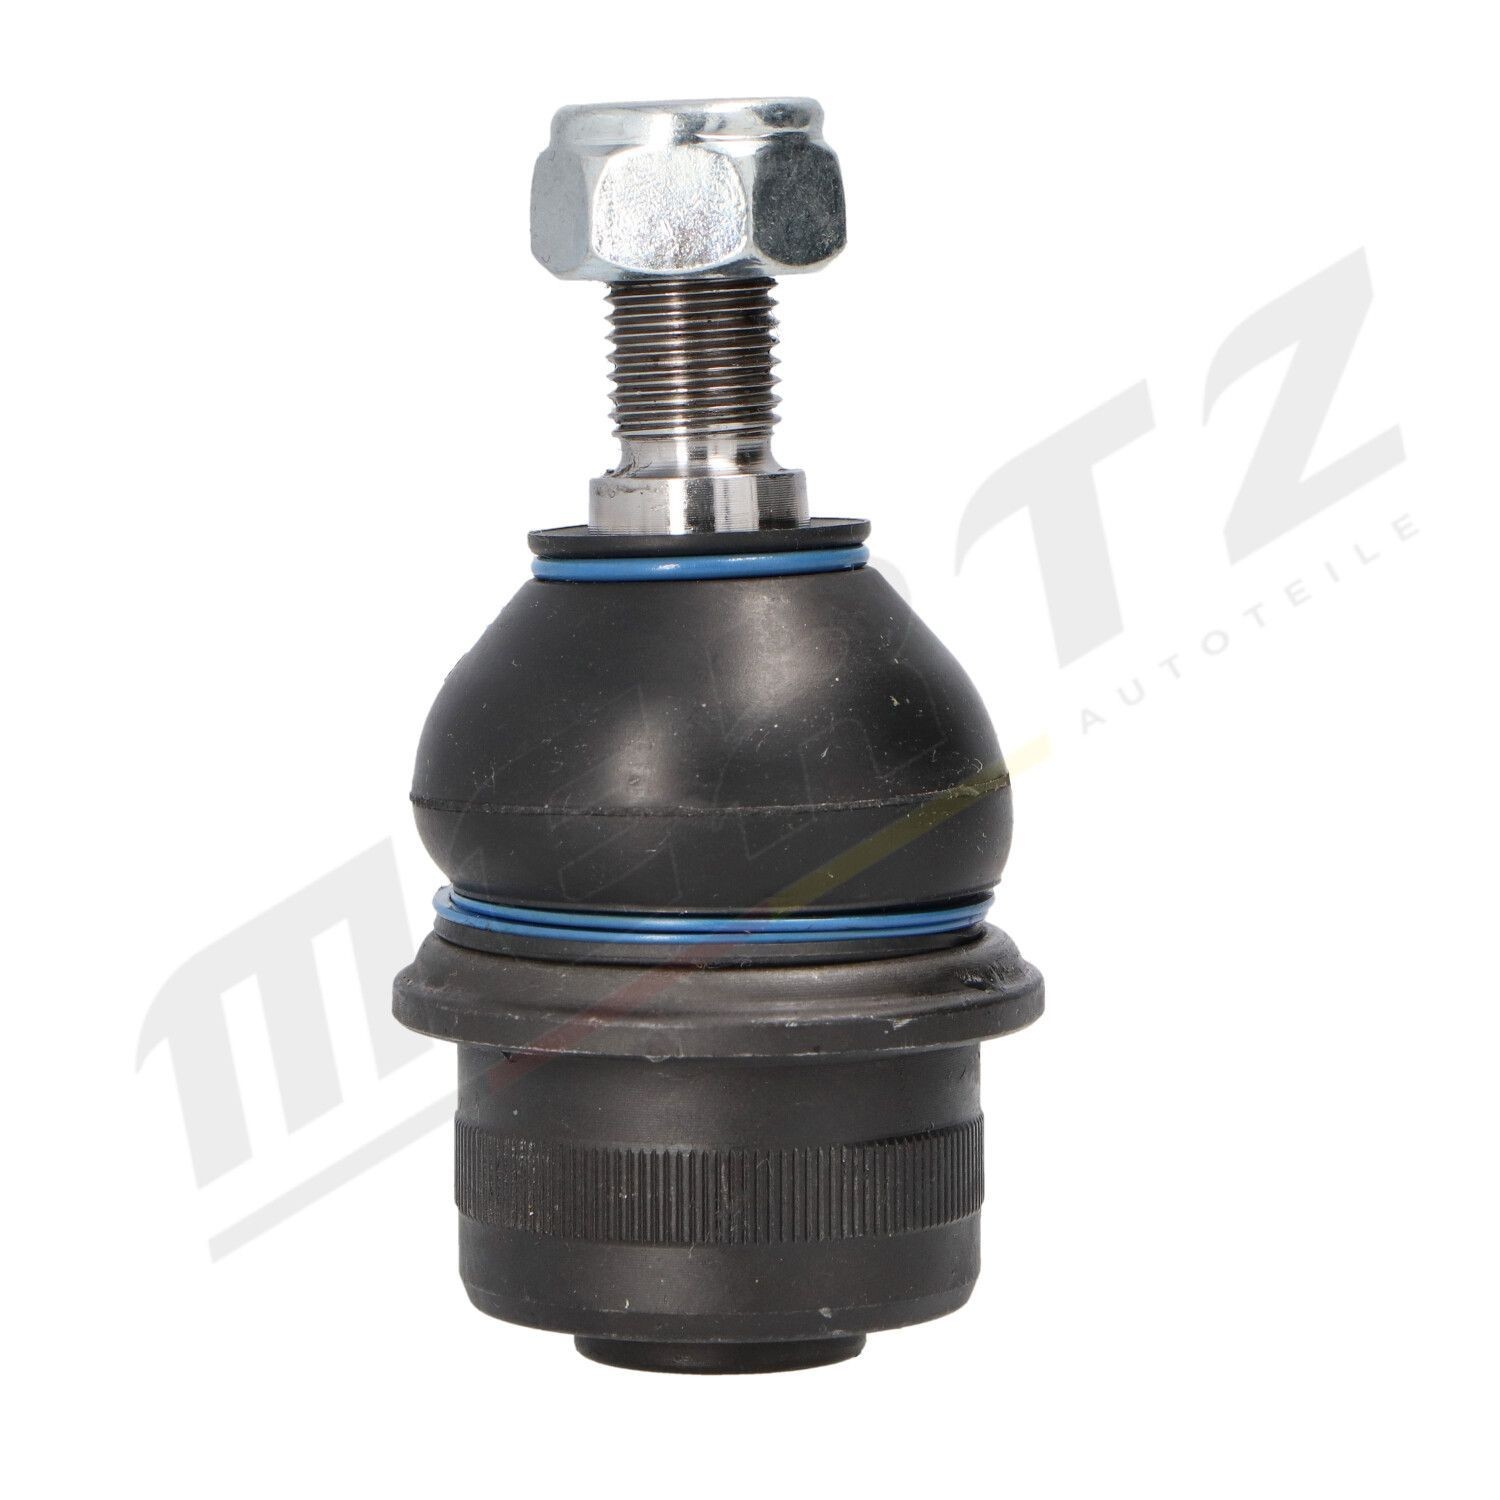 Suspension ball joint MERTZ Front Axle Left, Front Axle Right, with nut, 17,1mm, M14x1,5mm - M-S0041